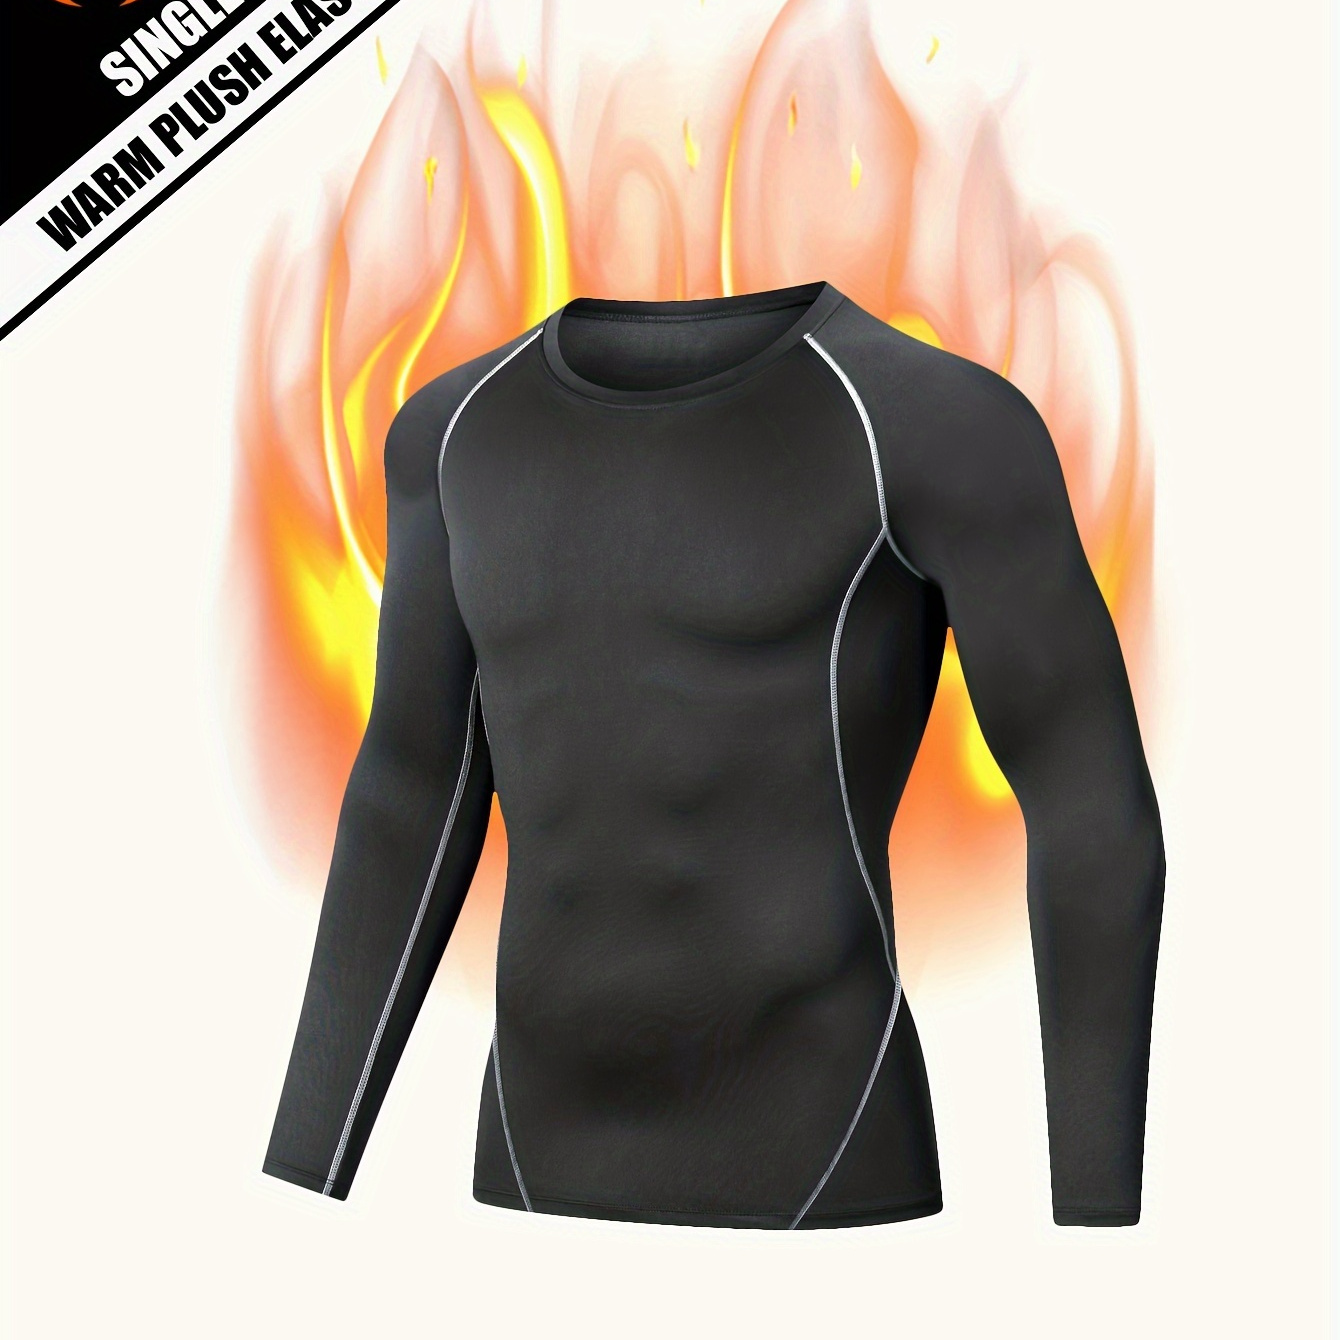 

Men's Thermal Warm Underwear For Winter Fitness, Men's Tight High-elastic Long Sleeve Compression Round Neck T-shirt, Training Running